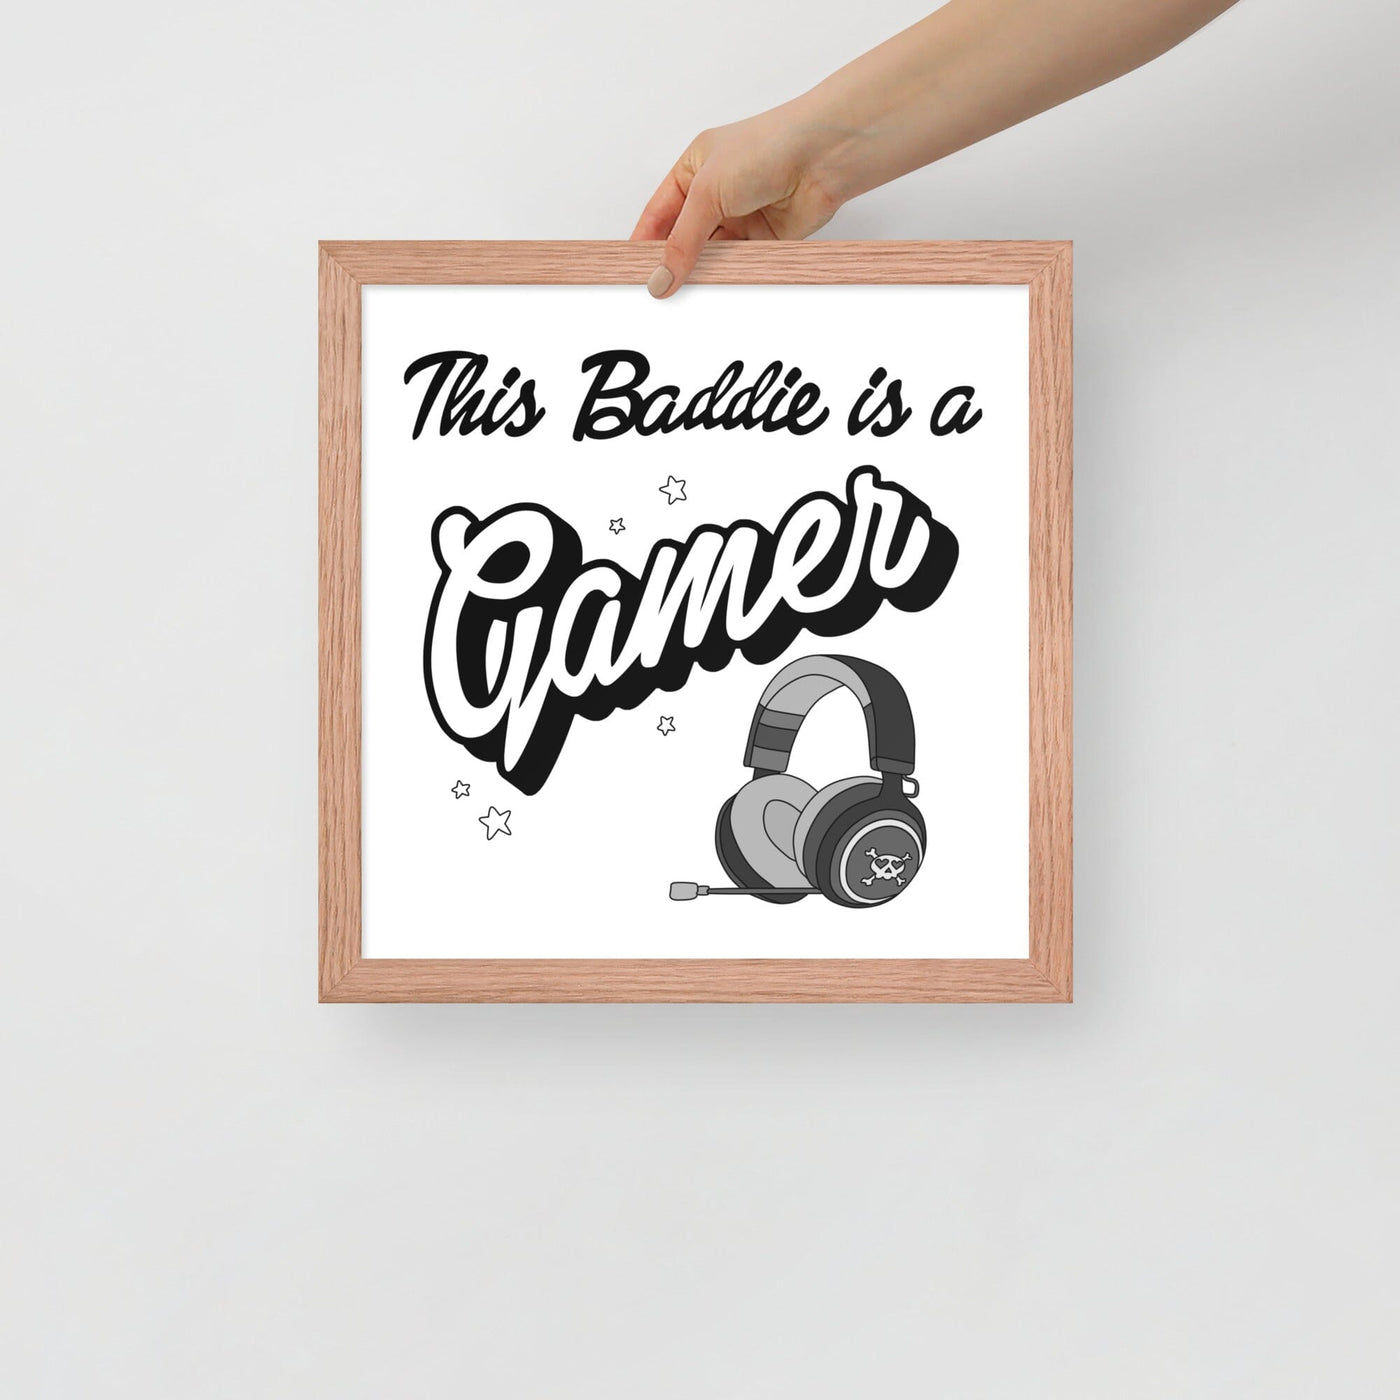 This Baddie is a Gamer (Punk) | Framed poster | Feminist Gamer Threads & Thistles Inventory Red Oak 14″×14″ 